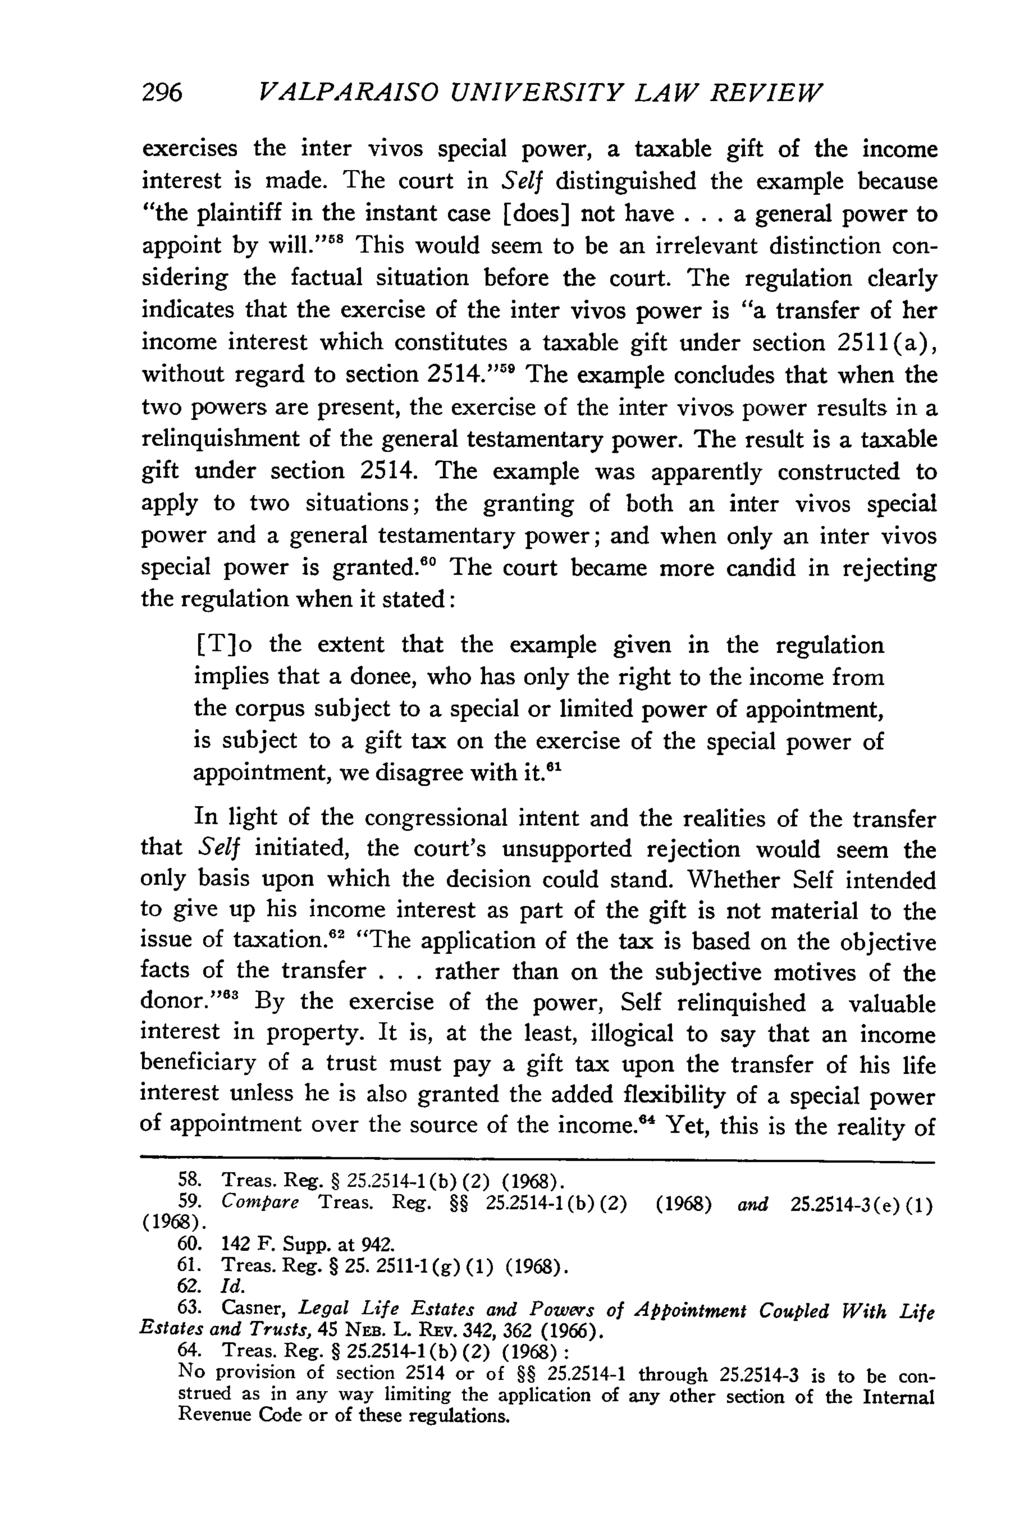 et al.: Special Powers of Appointment and the Gift Tax: The Impact of Sel 296 VALPARAISO UNIVERSITY LAW REVIEW exercises the inter vivos special power, a taxable gift of the income interest is made.